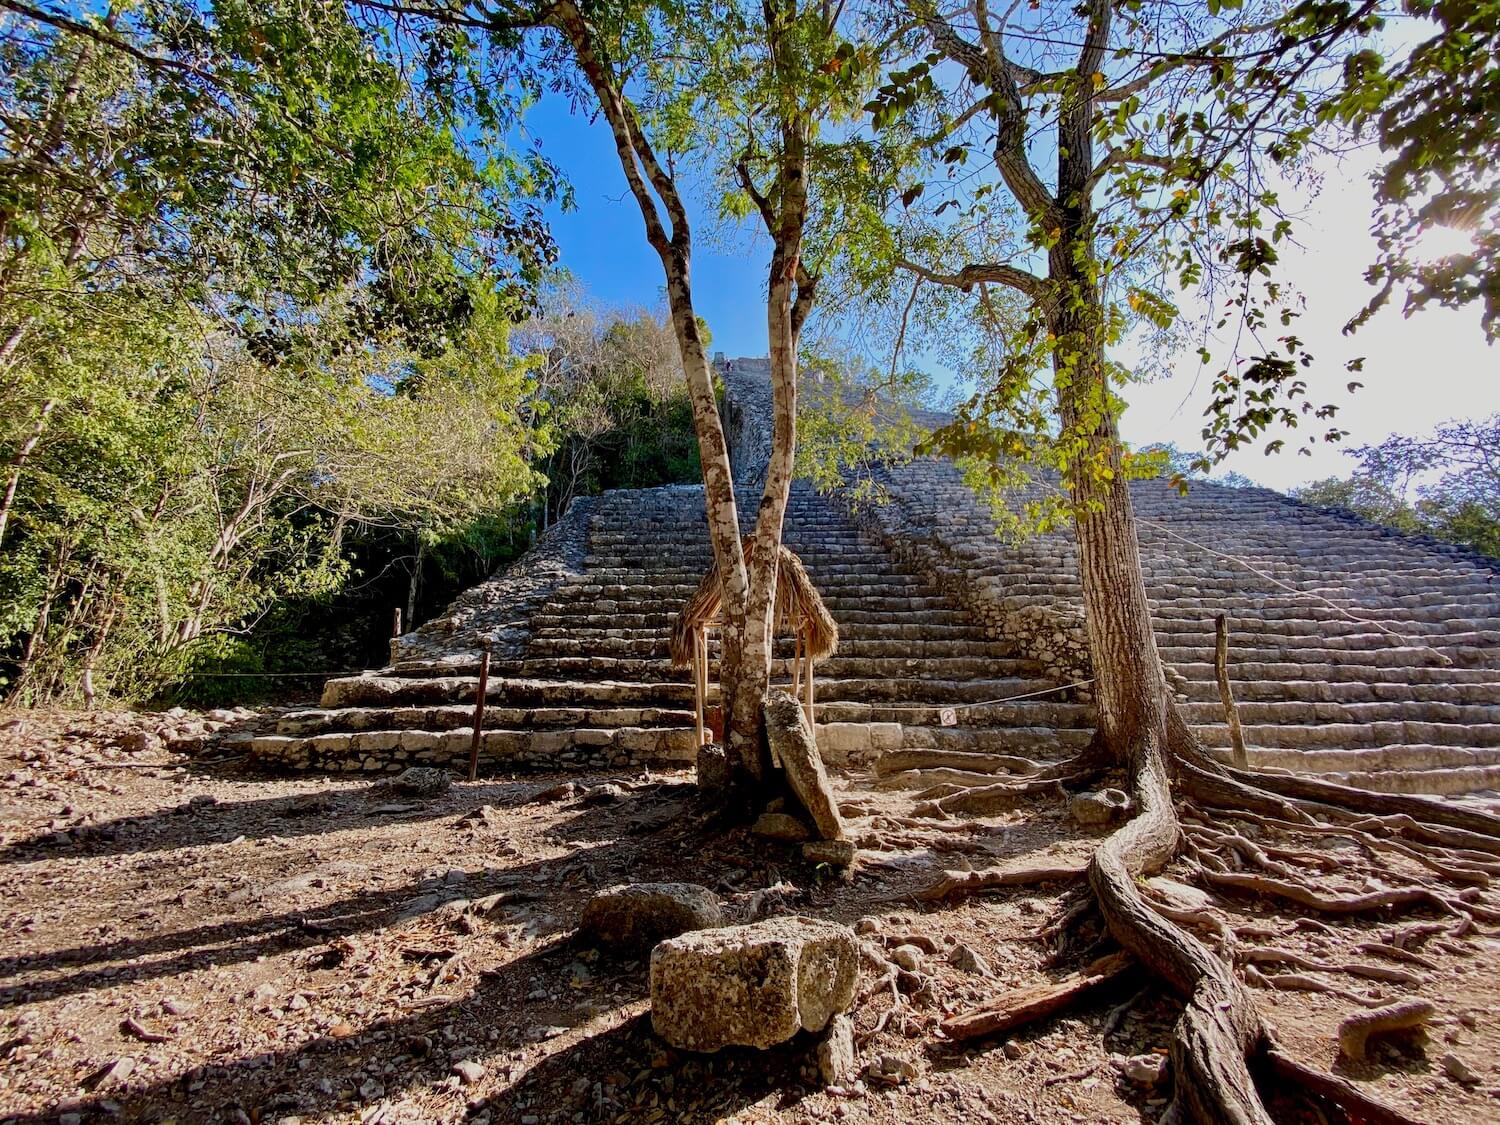 The great Nohoc-Mul is the highest Mayan Pyramids and climbing to the top is still allowed. In this shot the grand blocks of stone piling up to form the giant structure are behind several jungle trees that wind their way towards the sun and cast a lovely buttery morning shadow on the dirt floor of the jungle, amongst long winding roots that make there way to soil